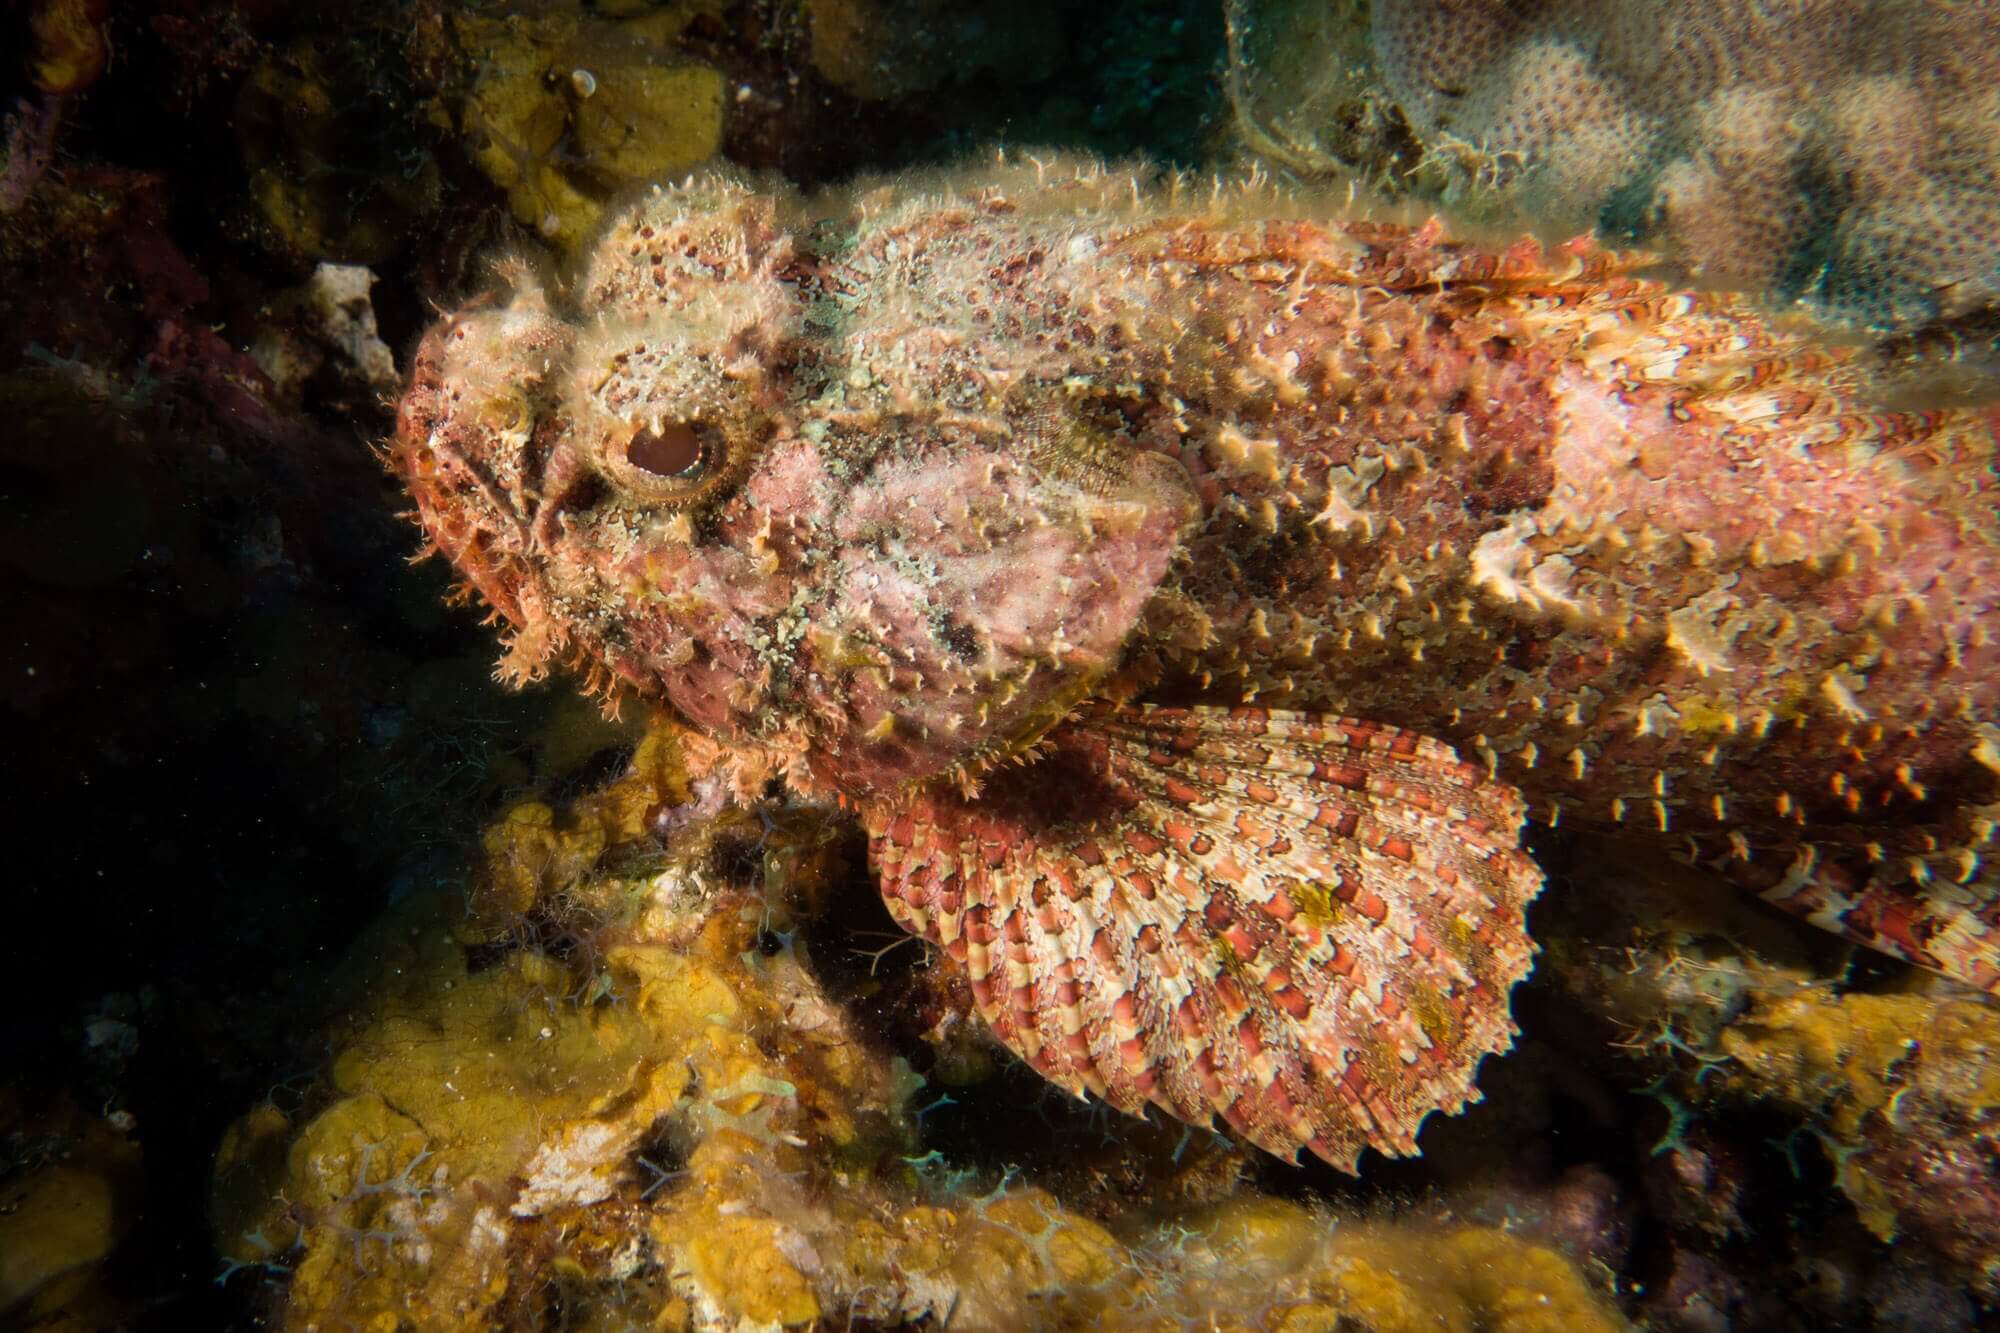 A scorpionfish at the Canyon Reef dive site in Roatán